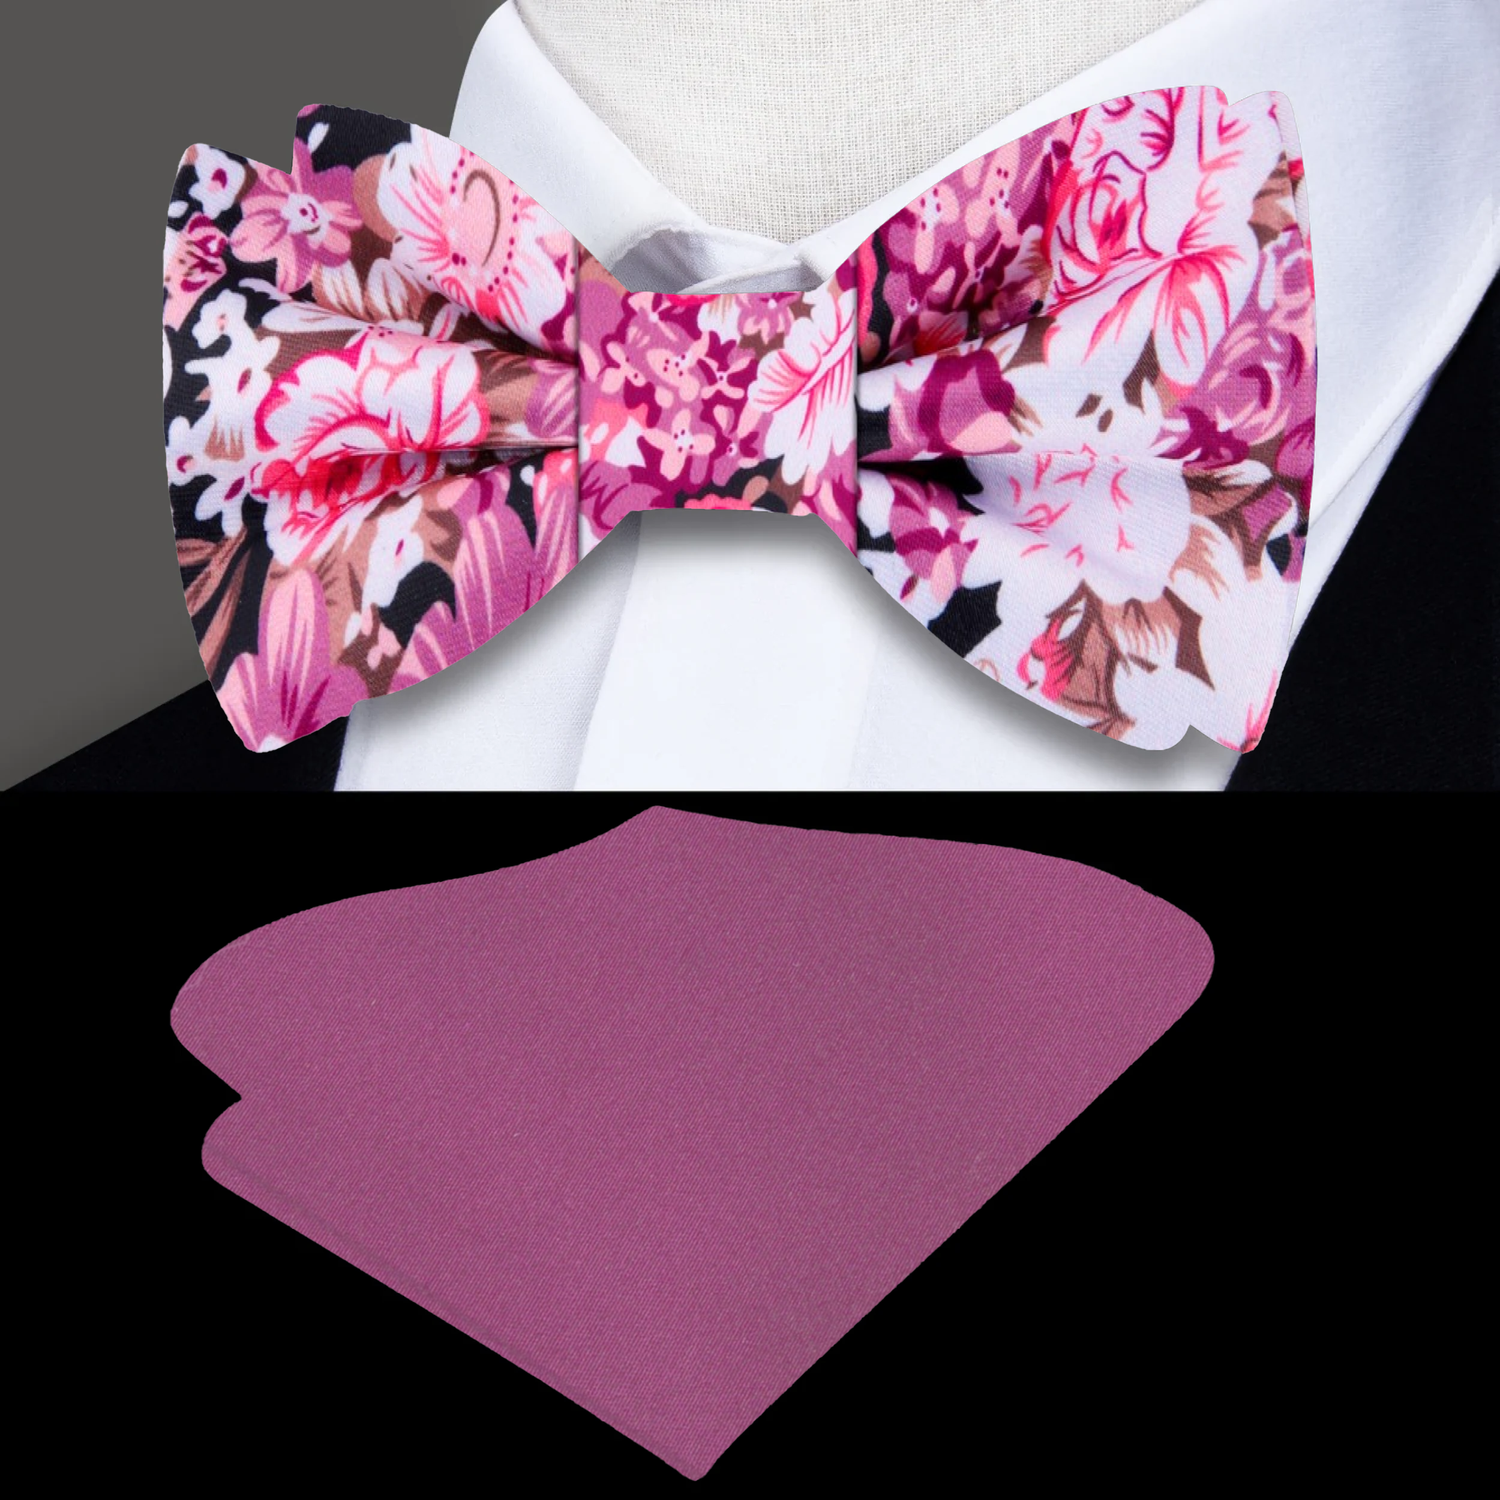 Shades of Purple and Pink with White Flowers Bow Tie and Accenting Pocket Square